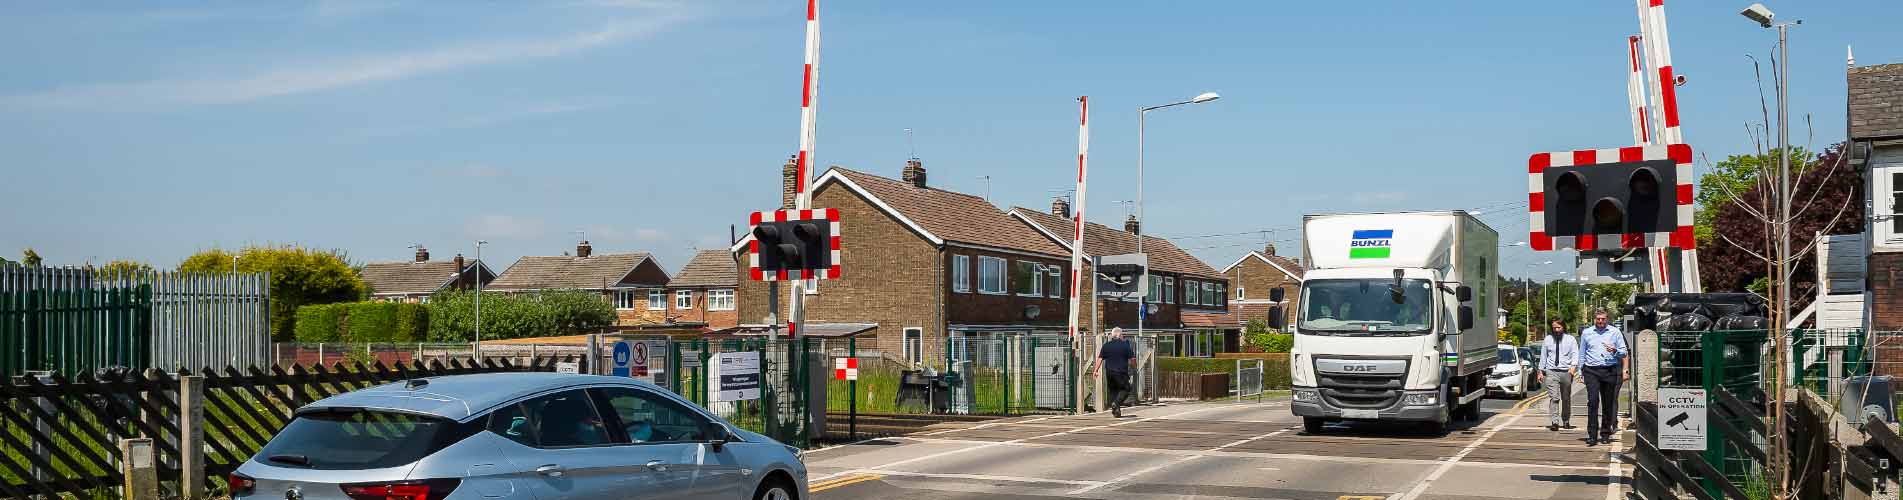 Vehicles at a level crossing